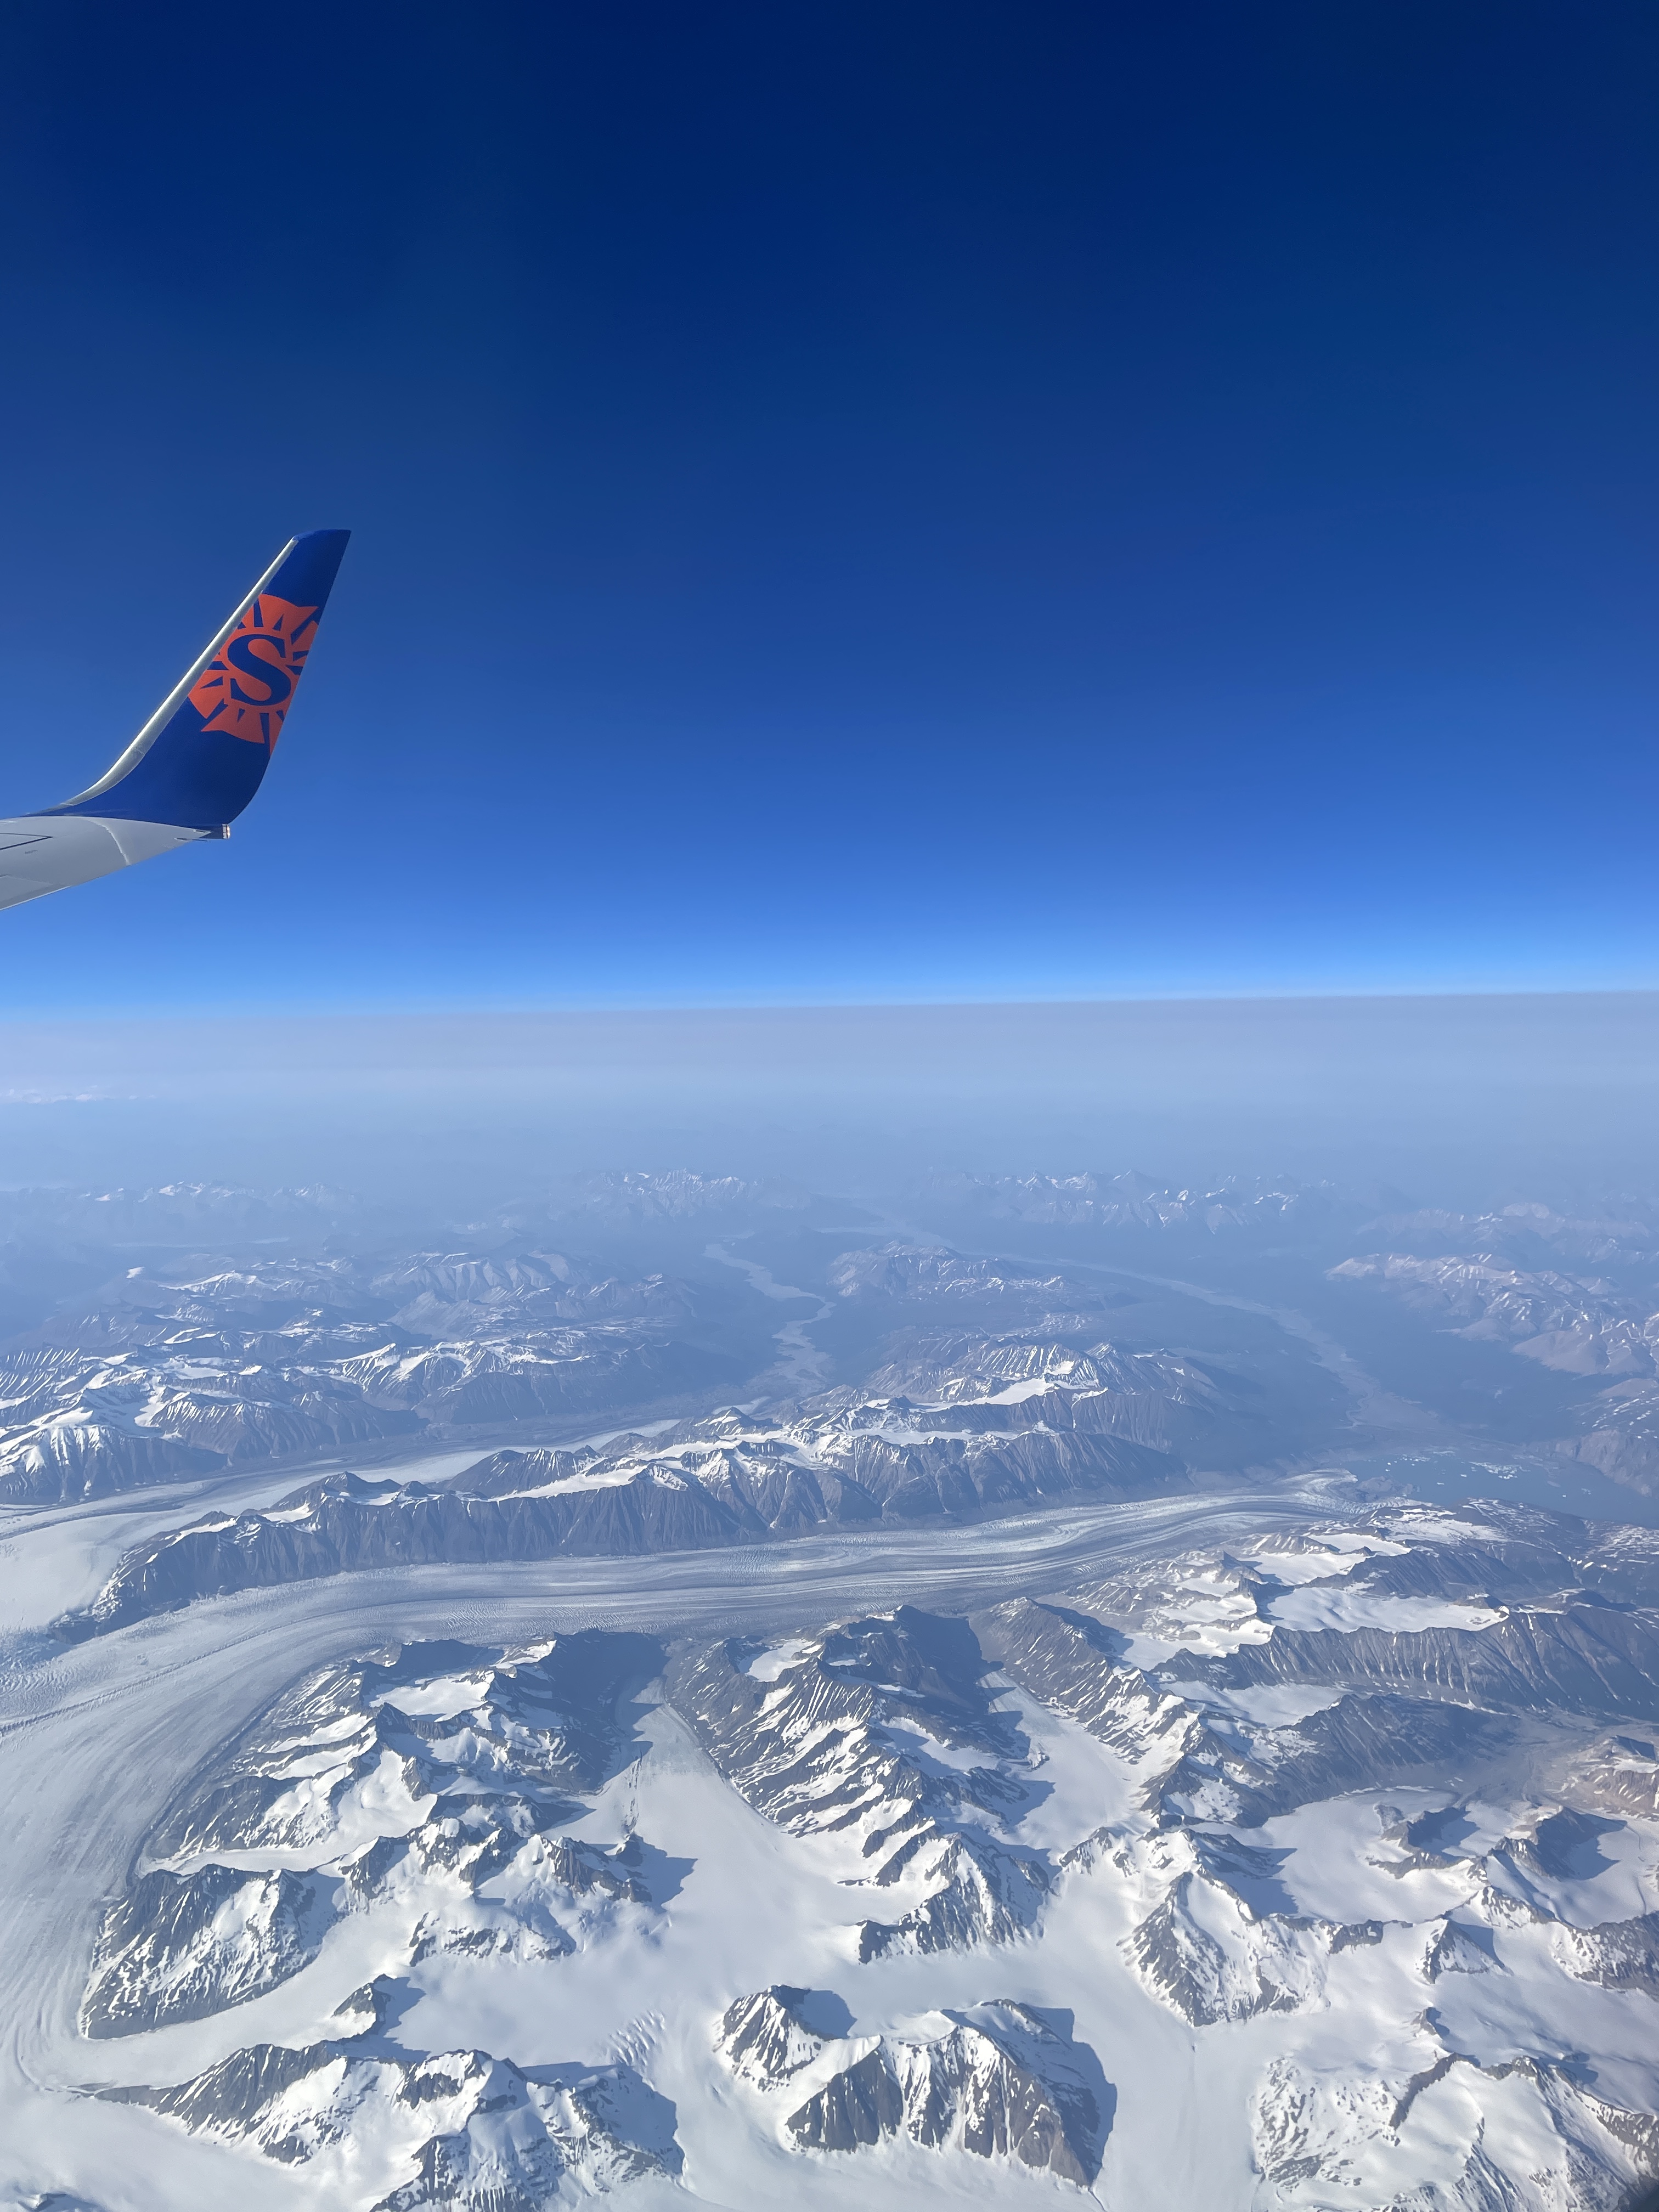 view of a snowy mountain range from a seat on a plane